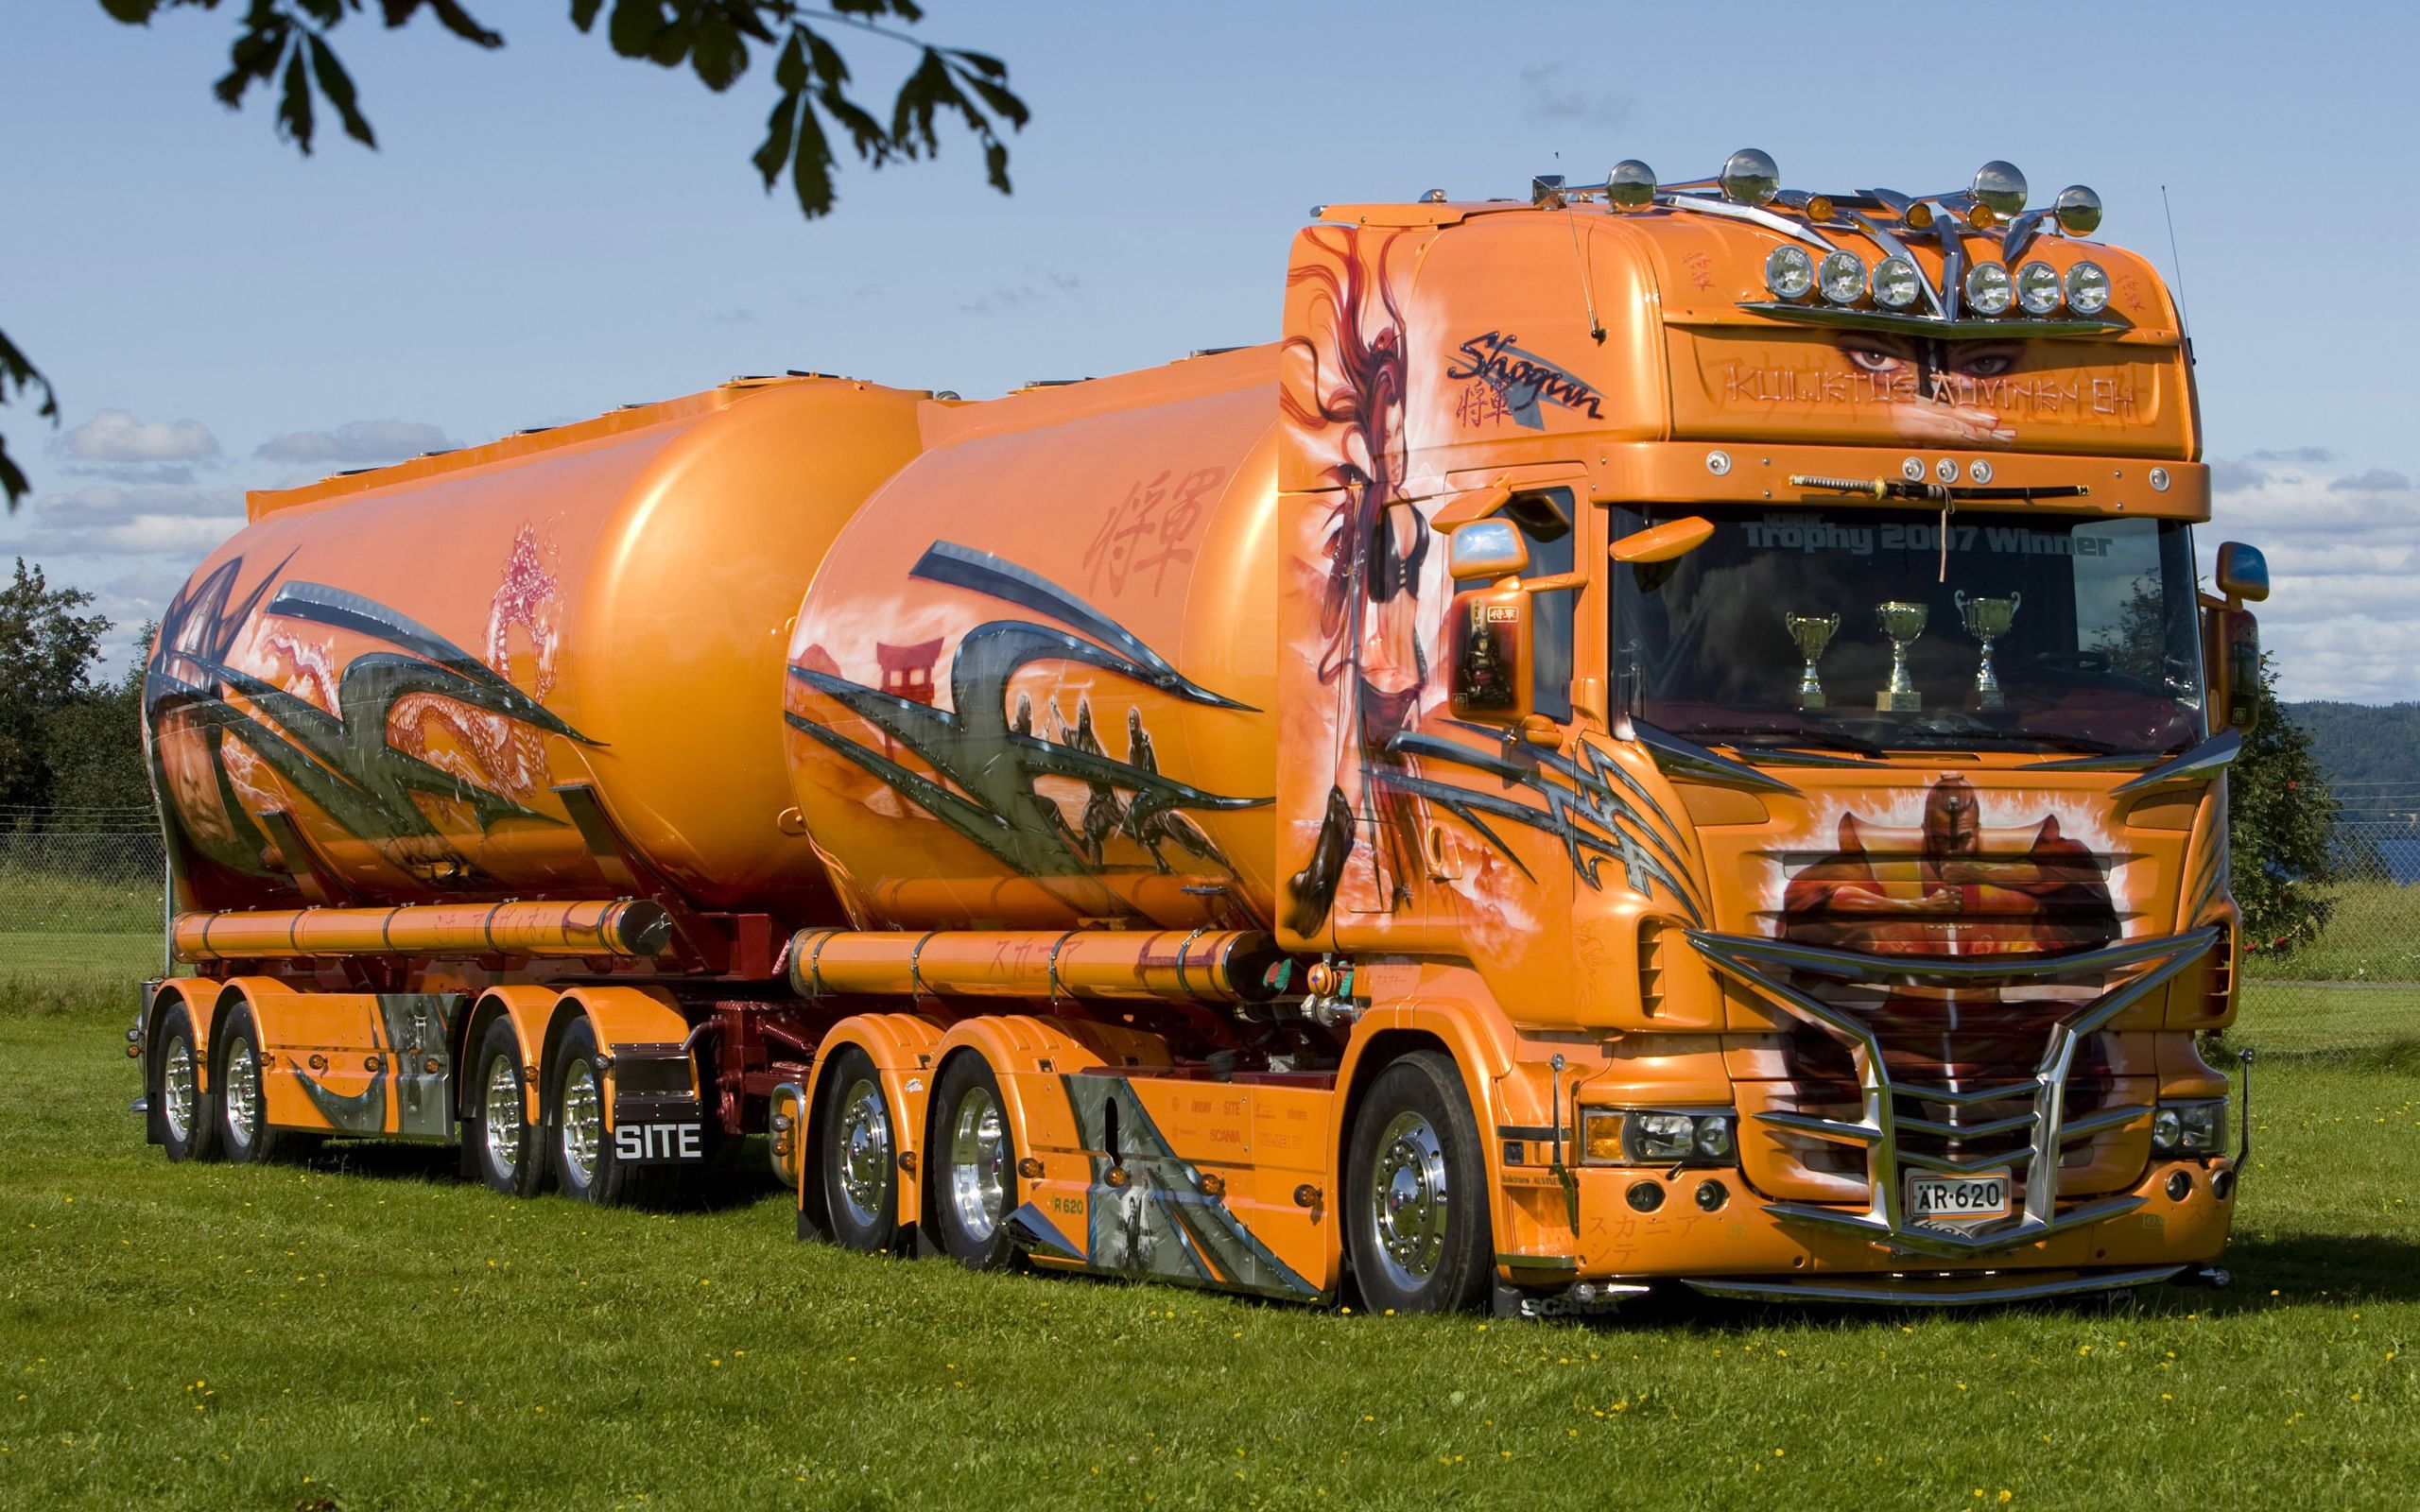 Vehicles Scania HD Wallpaper | Background Image